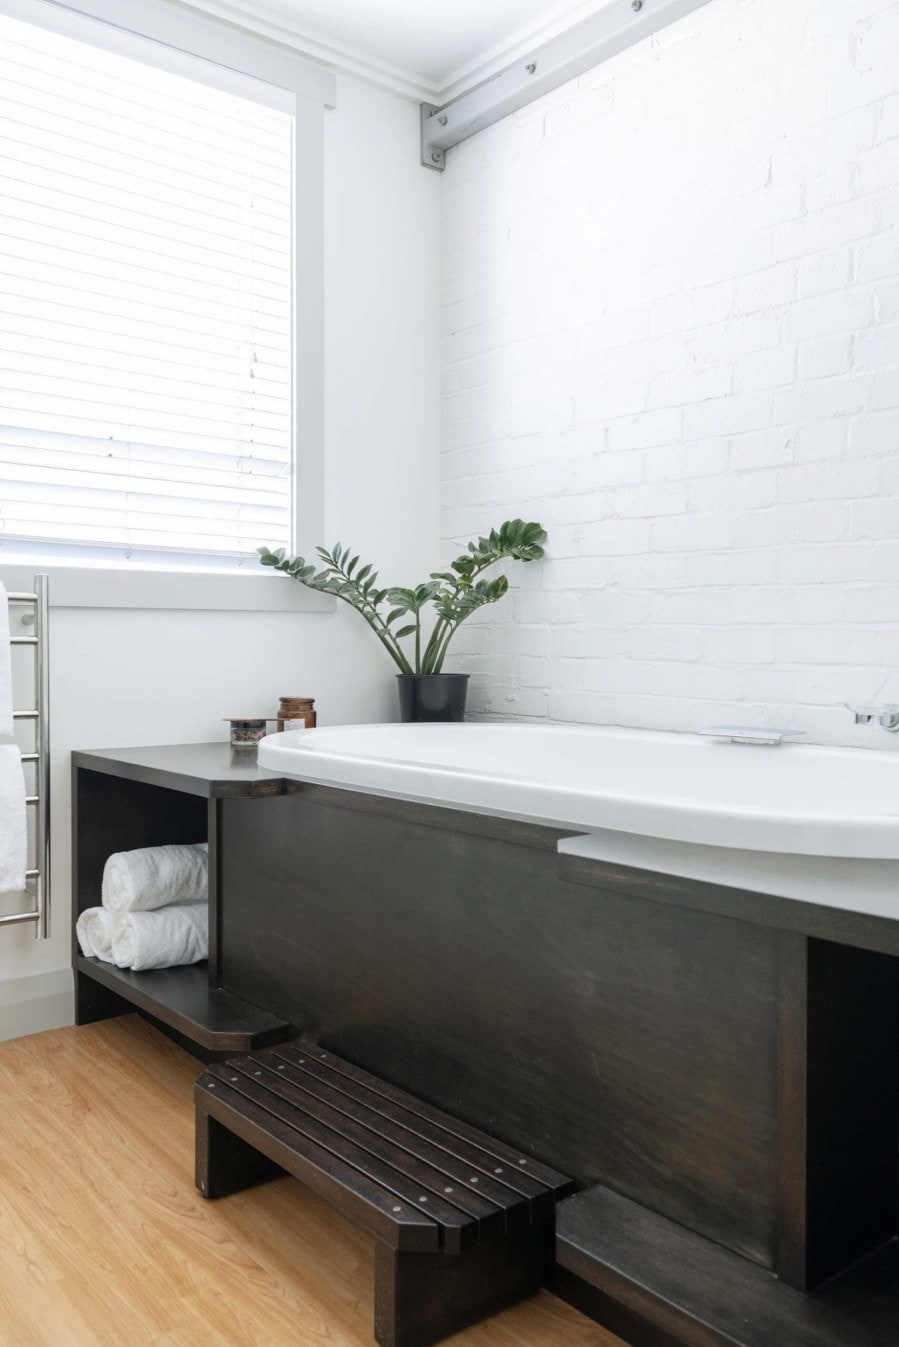 Bath with a black wooden frame and white brick wall